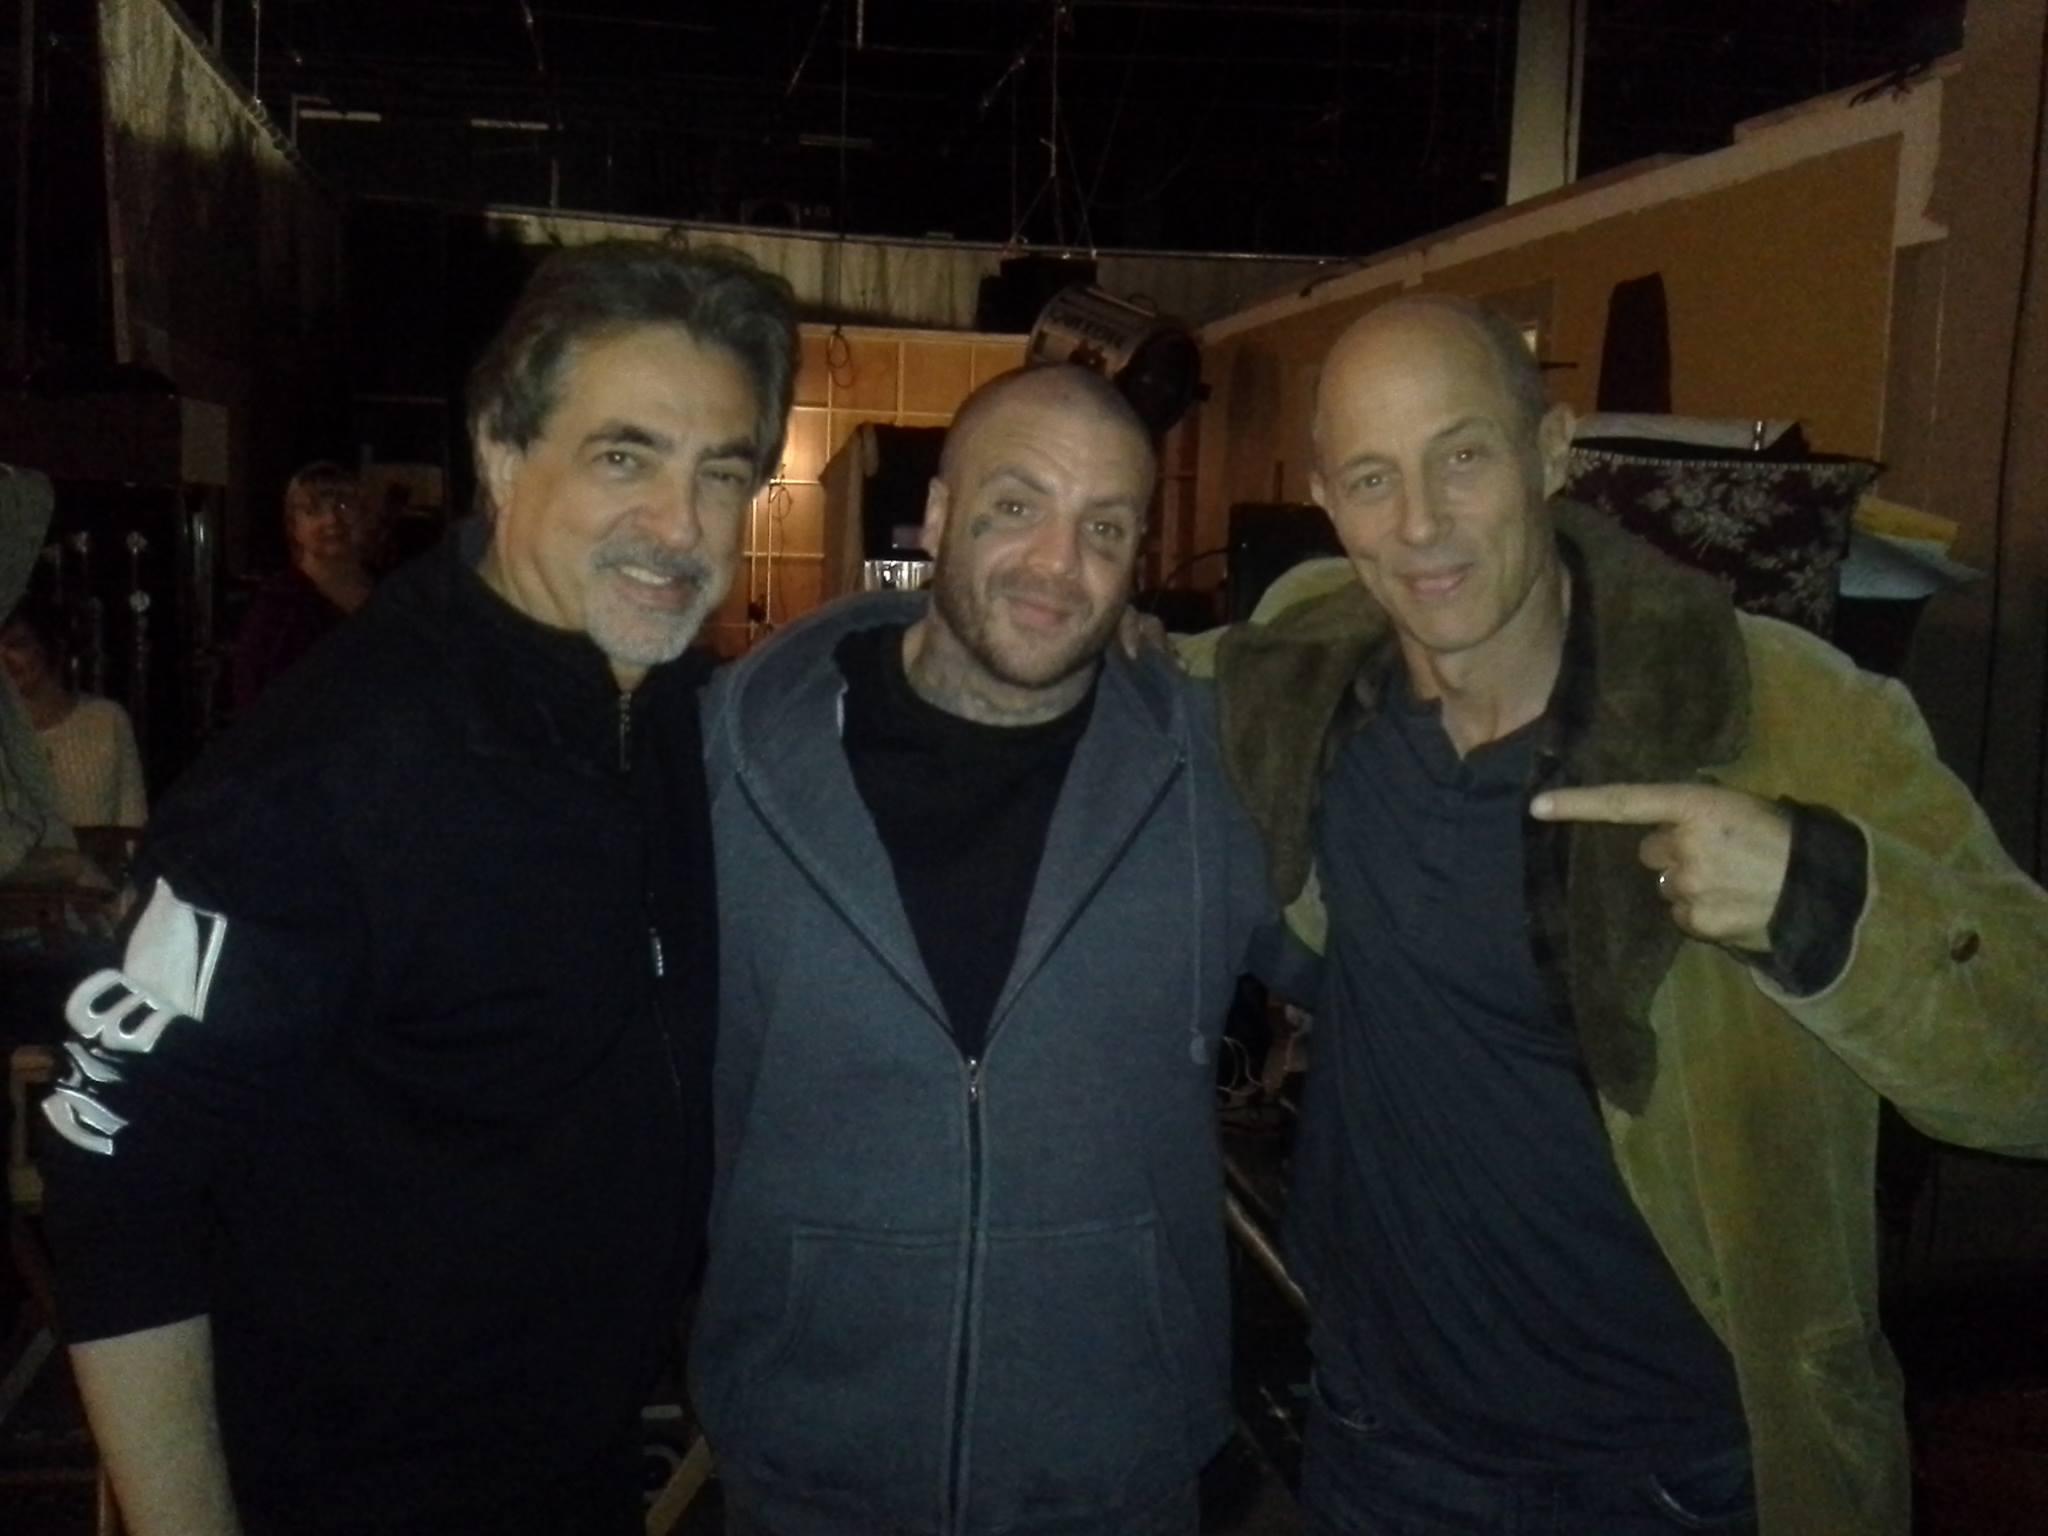 Right after I got killed on CRIMINAL MINDS! A real pleasure to work with Joe Mantegna & Jon Gries.